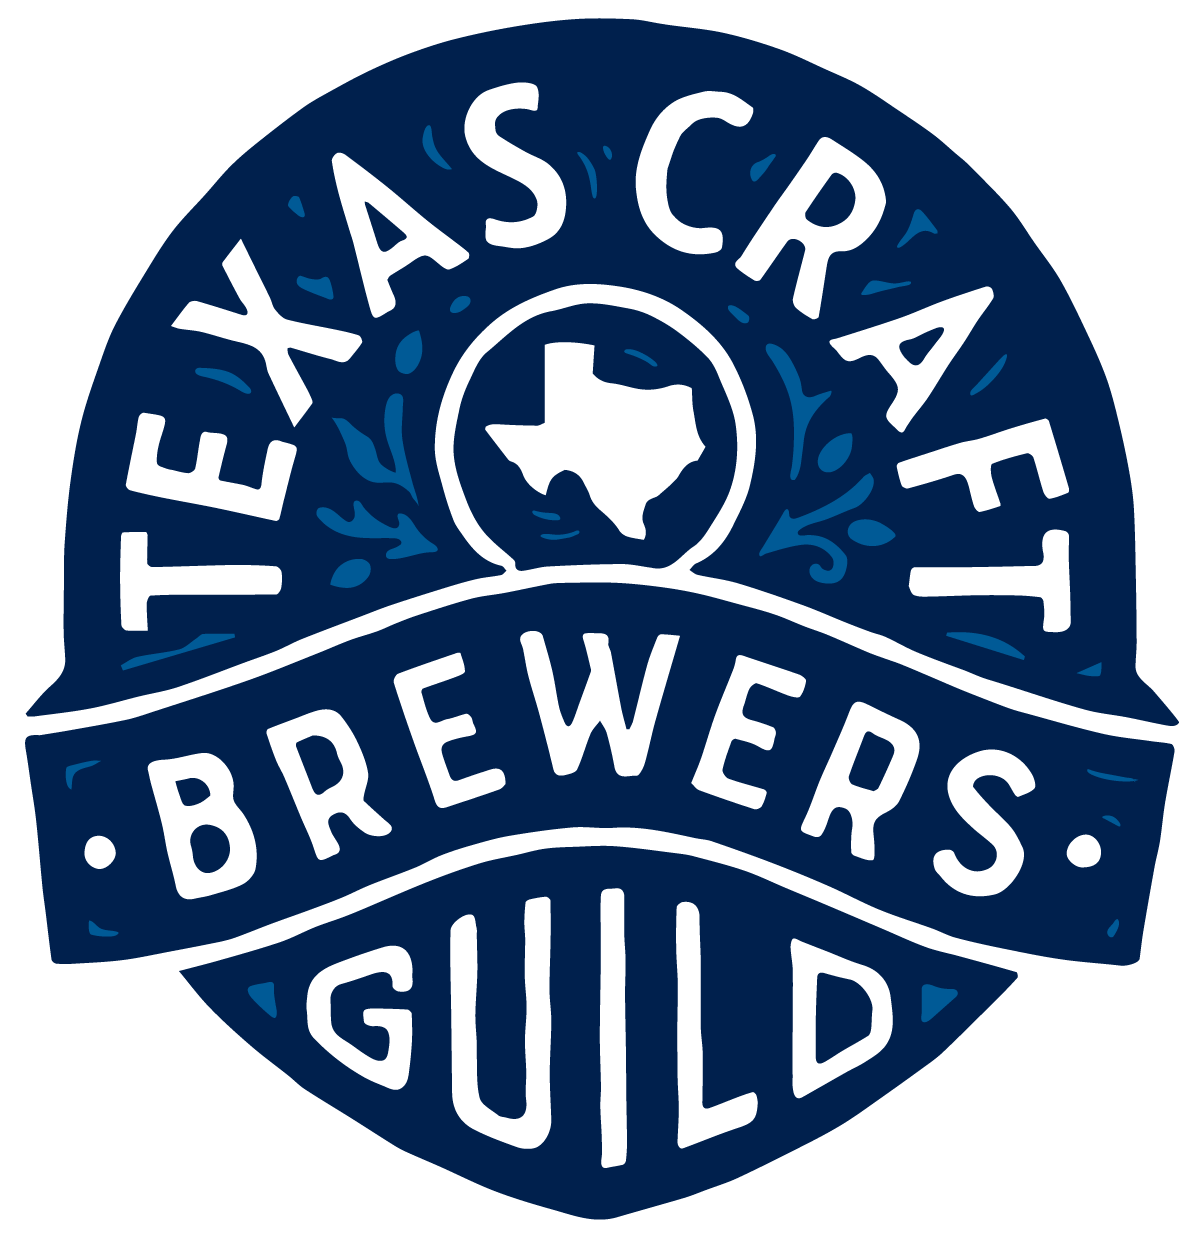 The Texas Craft Brewers Festival Is The State's Largest - Texas Craft Brewers Guild (1500x1500)